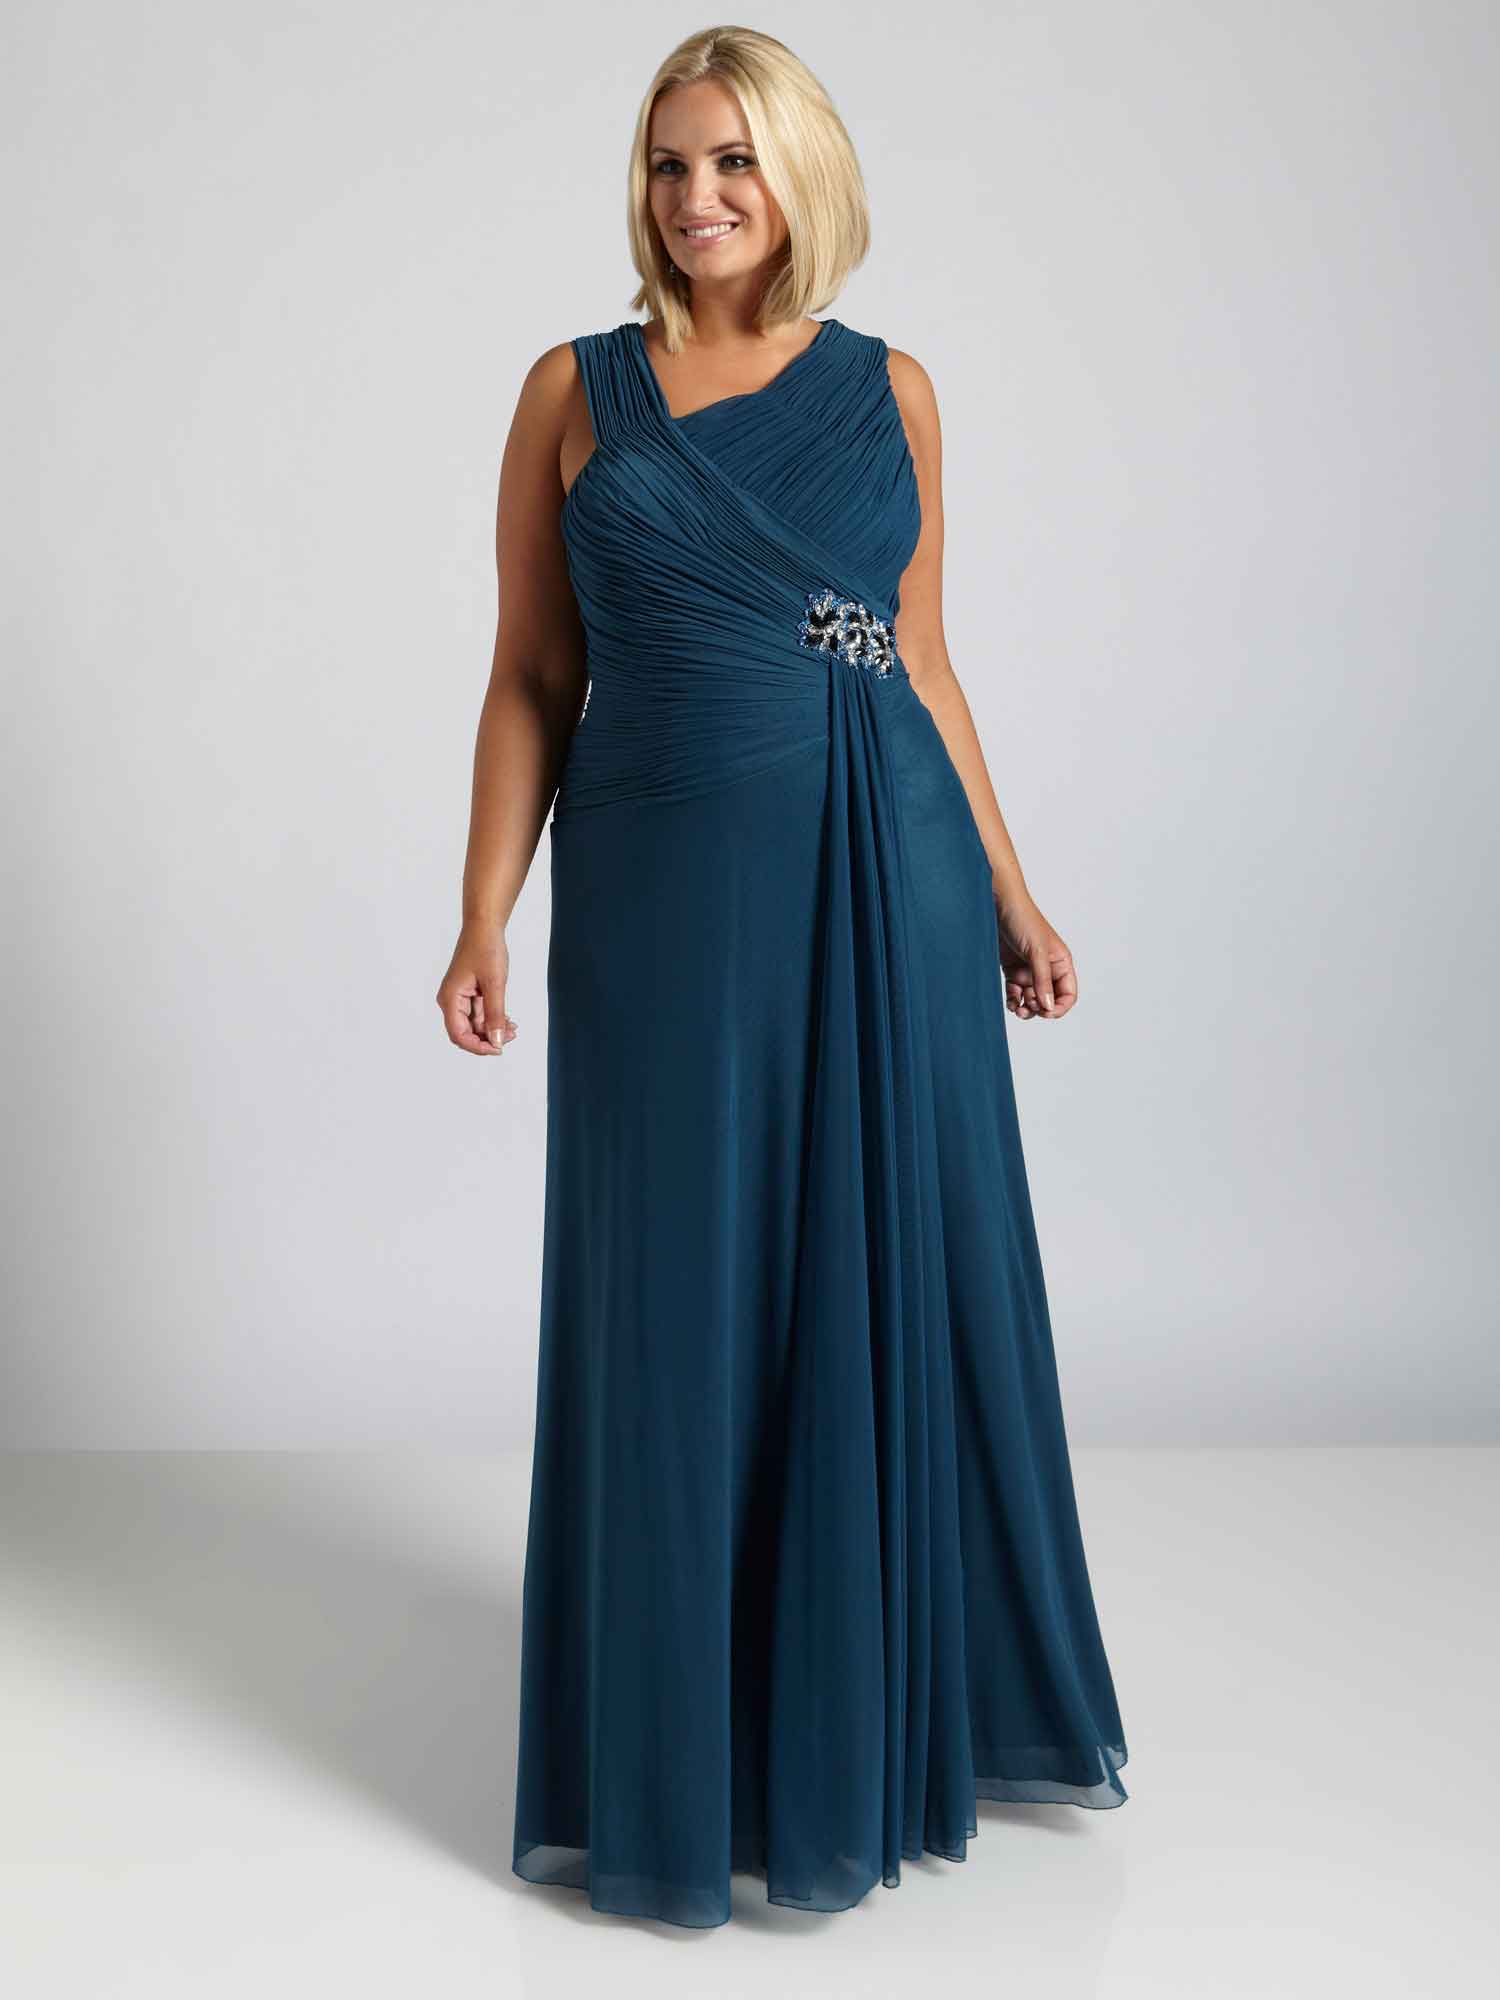 Plus Size Evening Dresses | Dressed Up Girl